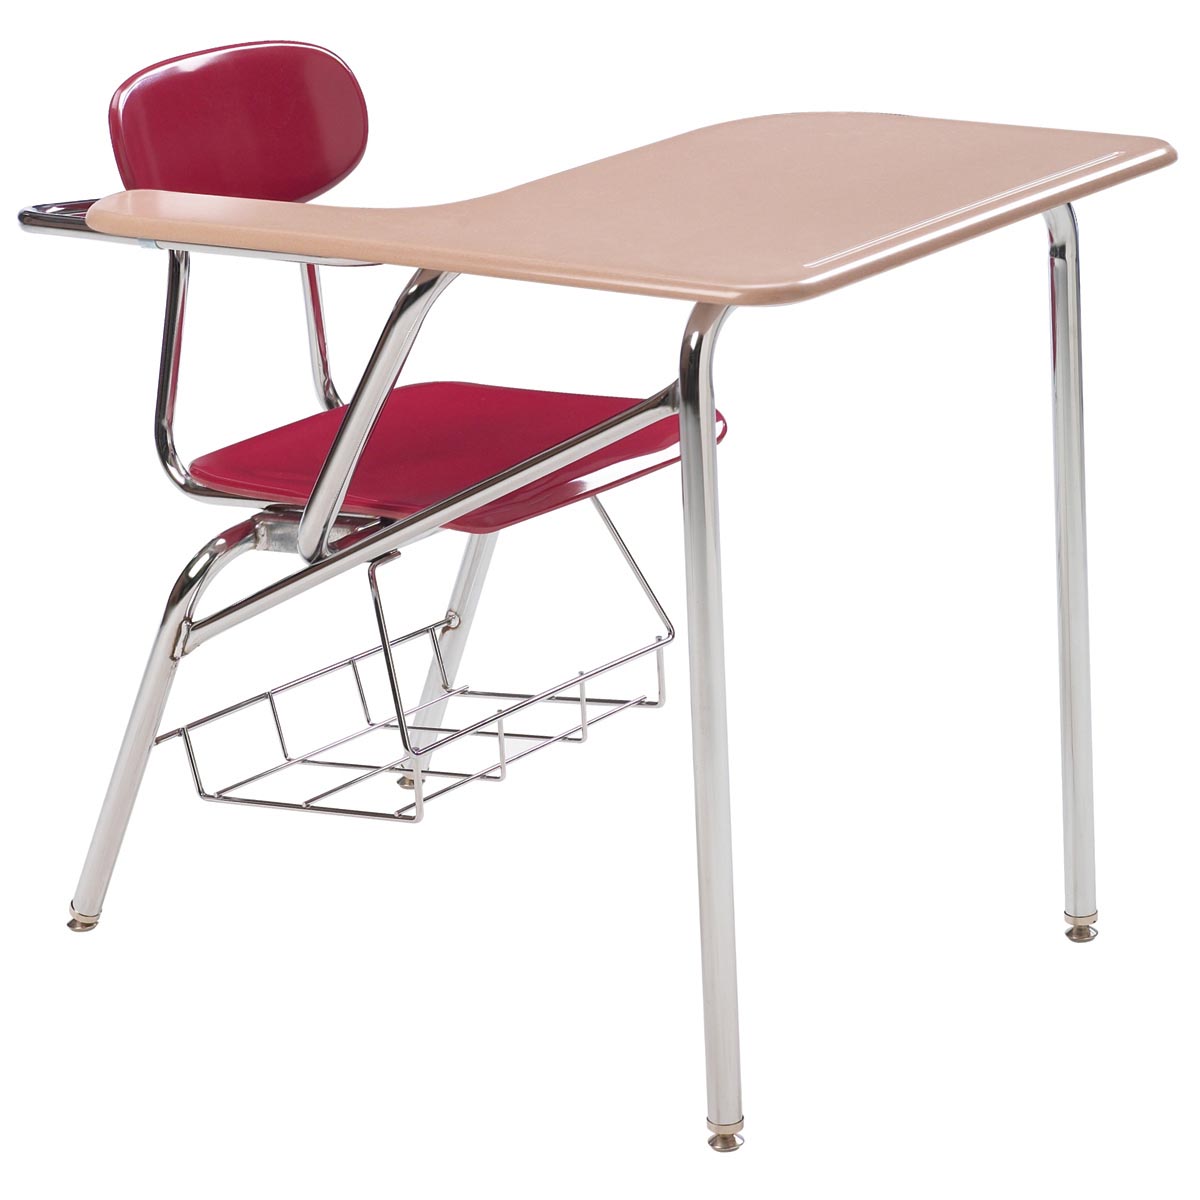 Hard-Plastic Series Tablet Arm Desk with WoodStone Top - 14" Seat Height